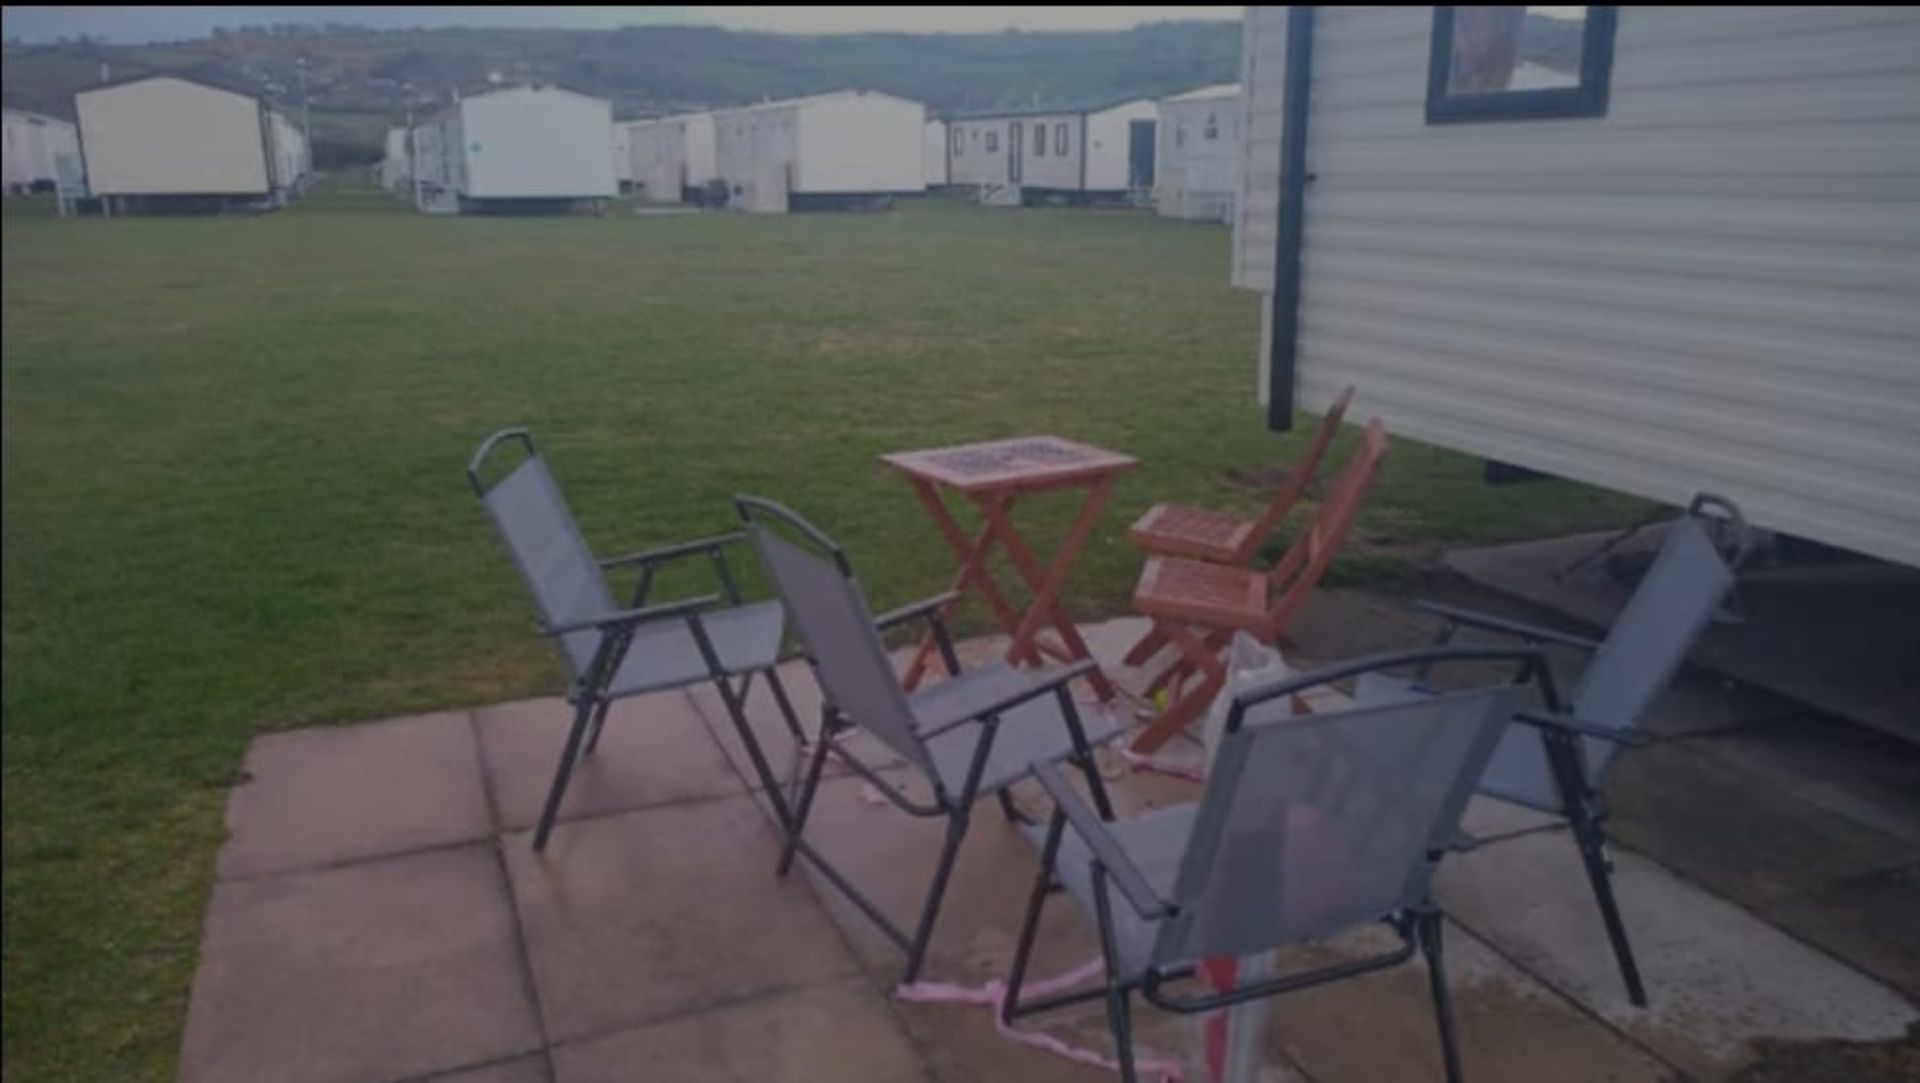 2015 WILLERBY ECO SALSA 3 BEDROOM holiday home ON-SITE SALE. - Image 11 of 13